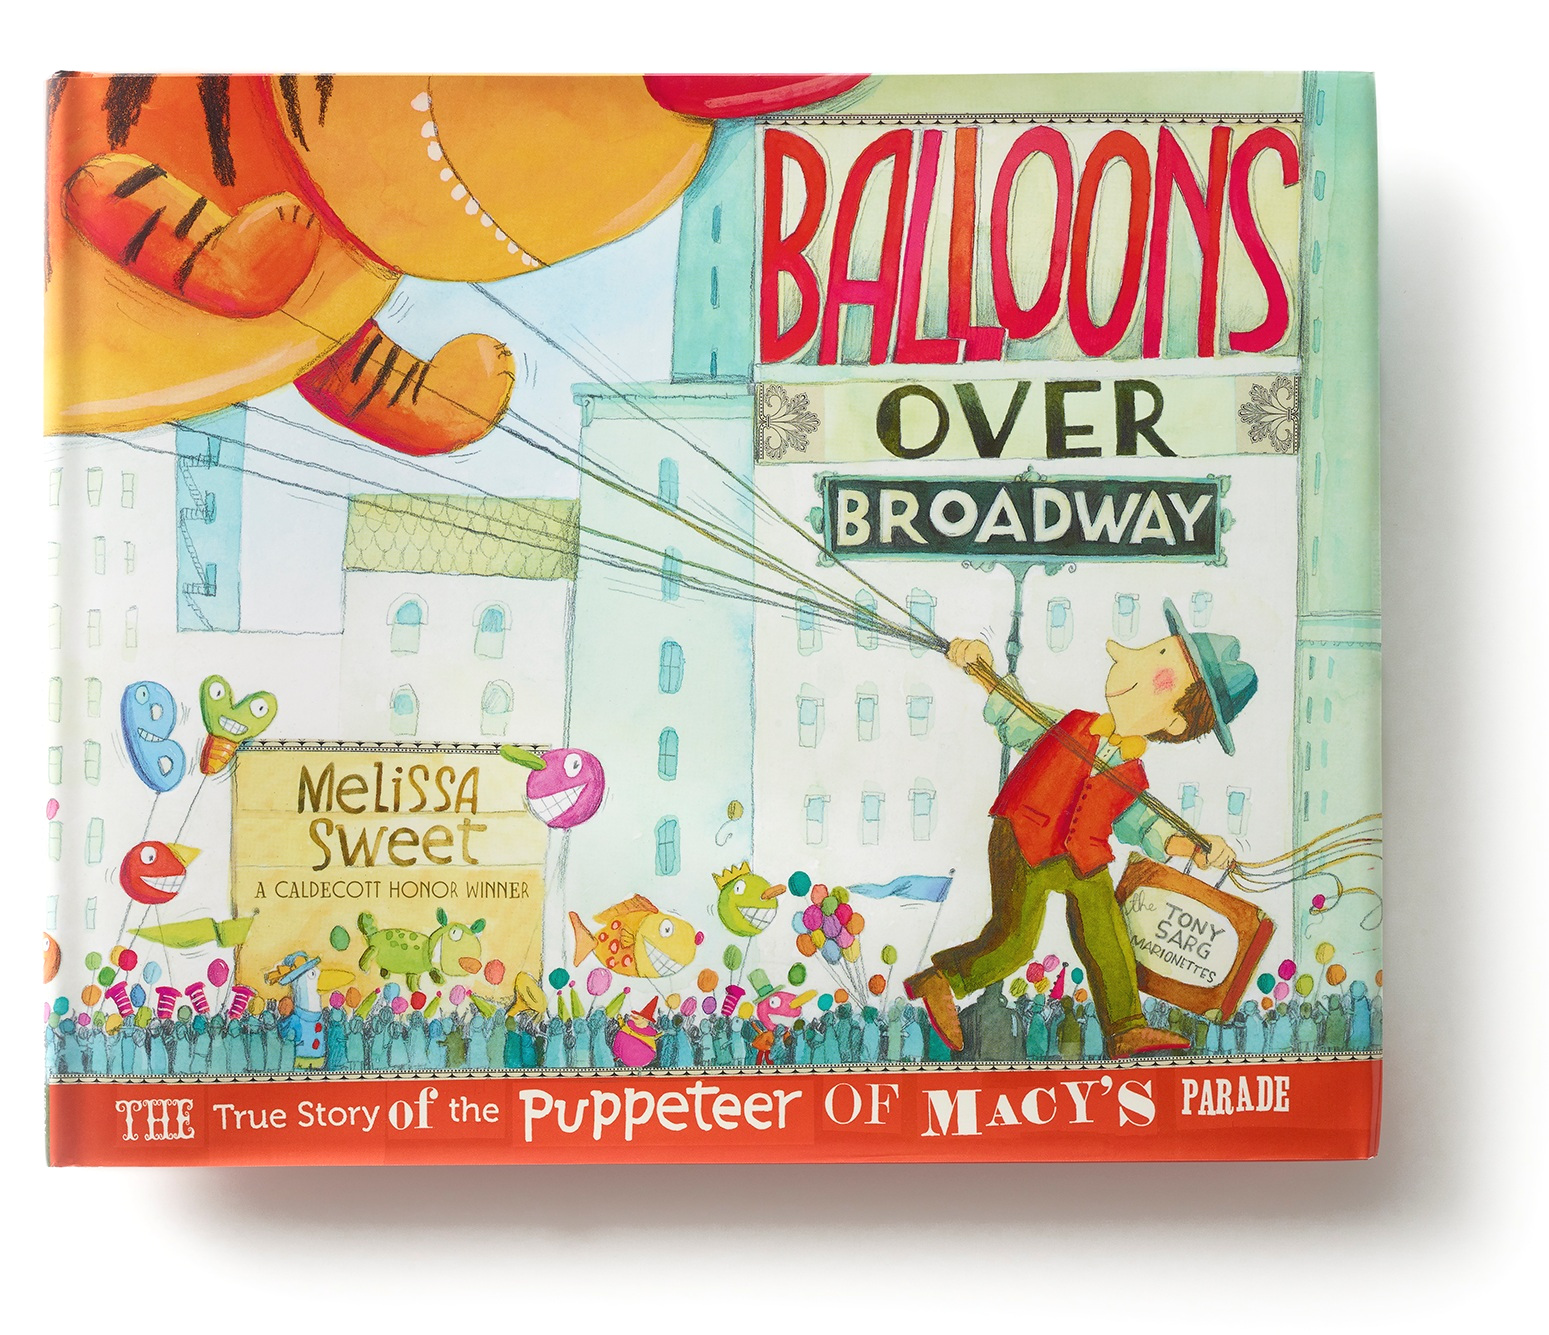 Balloons Over Broadway Cover.jpg